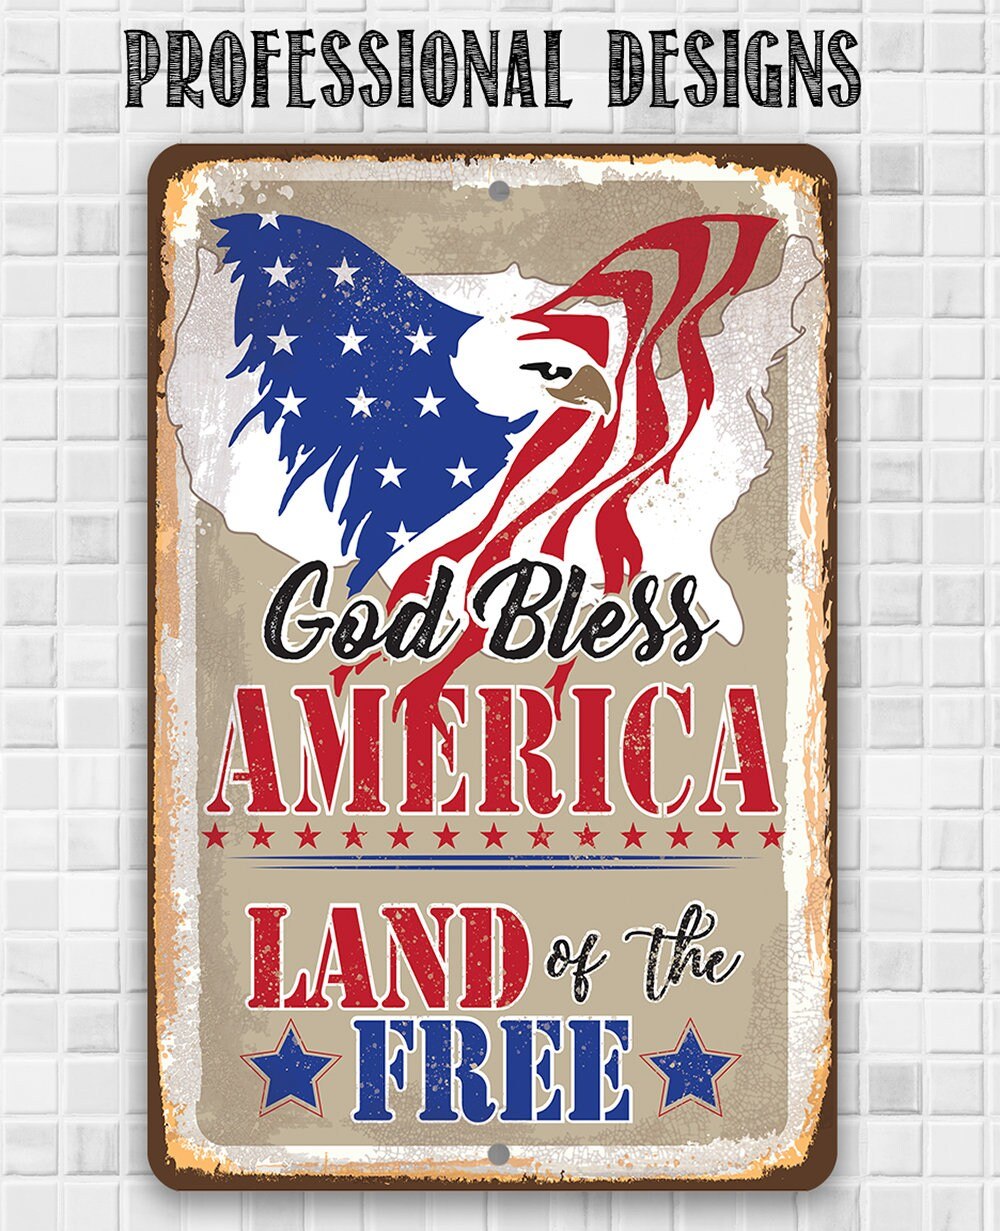 God Bless America, Land of the Free - 8" x 12" or 12" x 18" Aluminum Tin Awesome Metal Poster Lone Star Art 